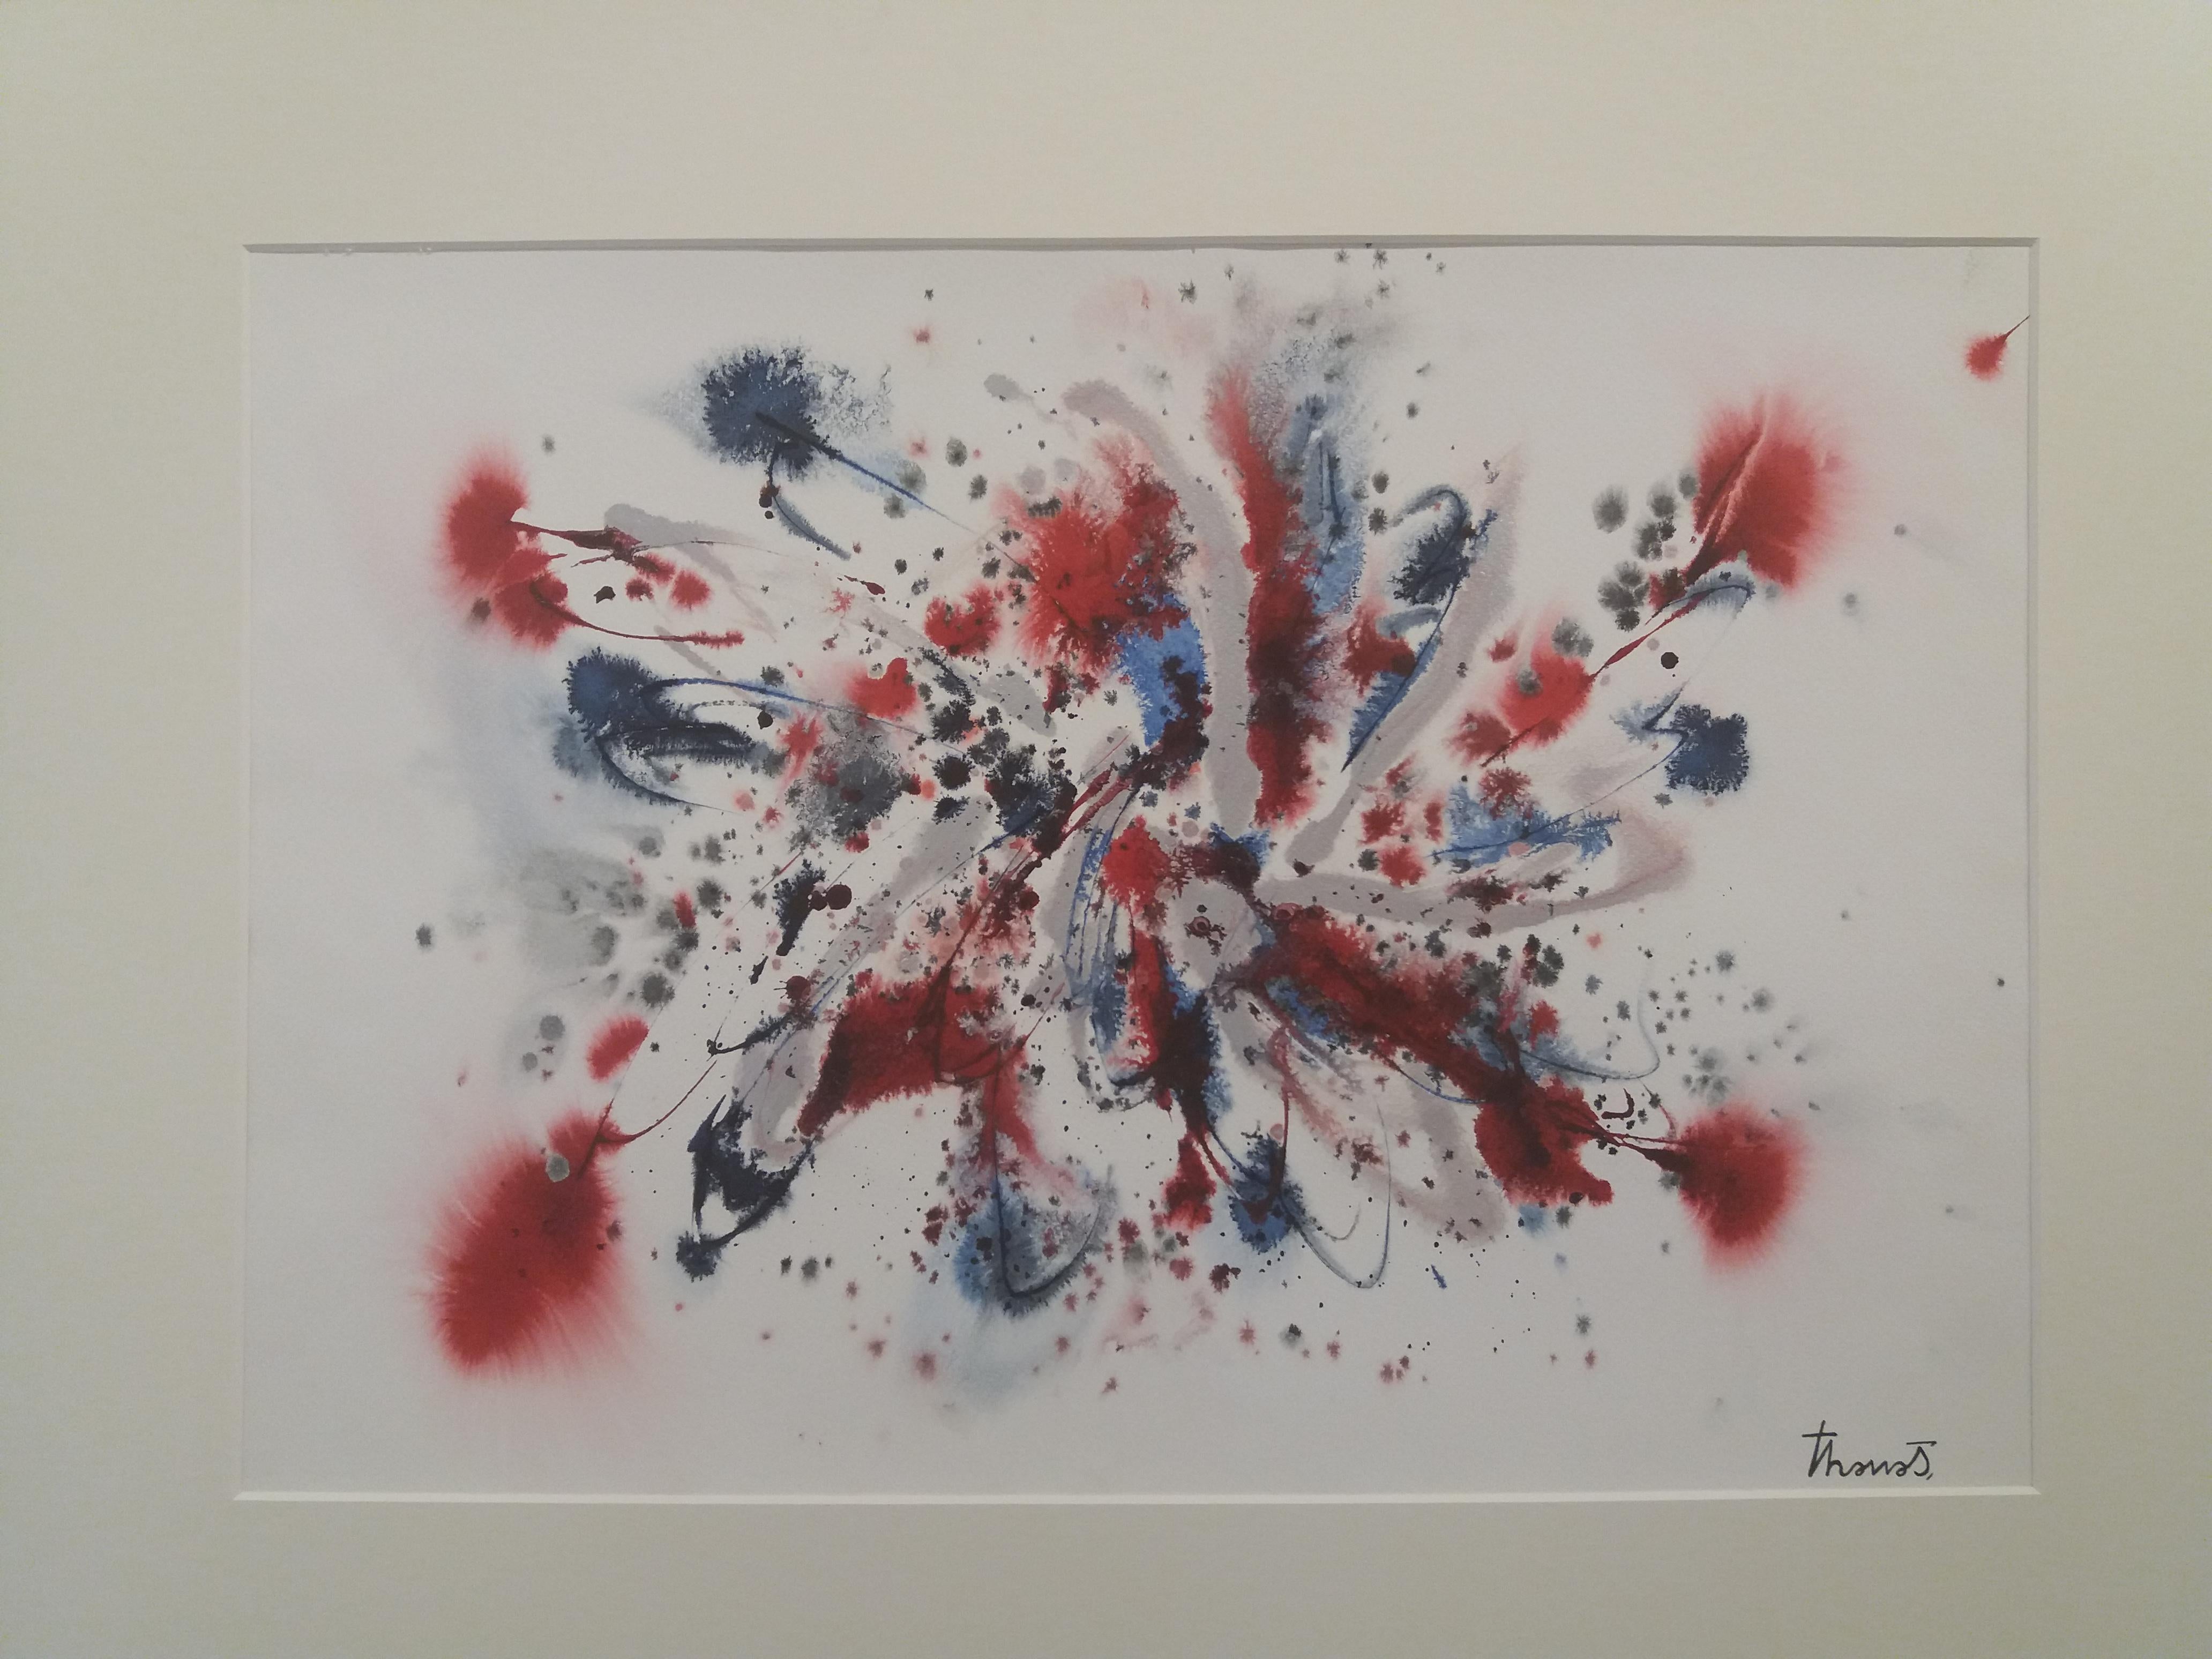 Tharrats  Red   Black Blue  Original abstract acrylic on paper - Painting by Josep THARRATS